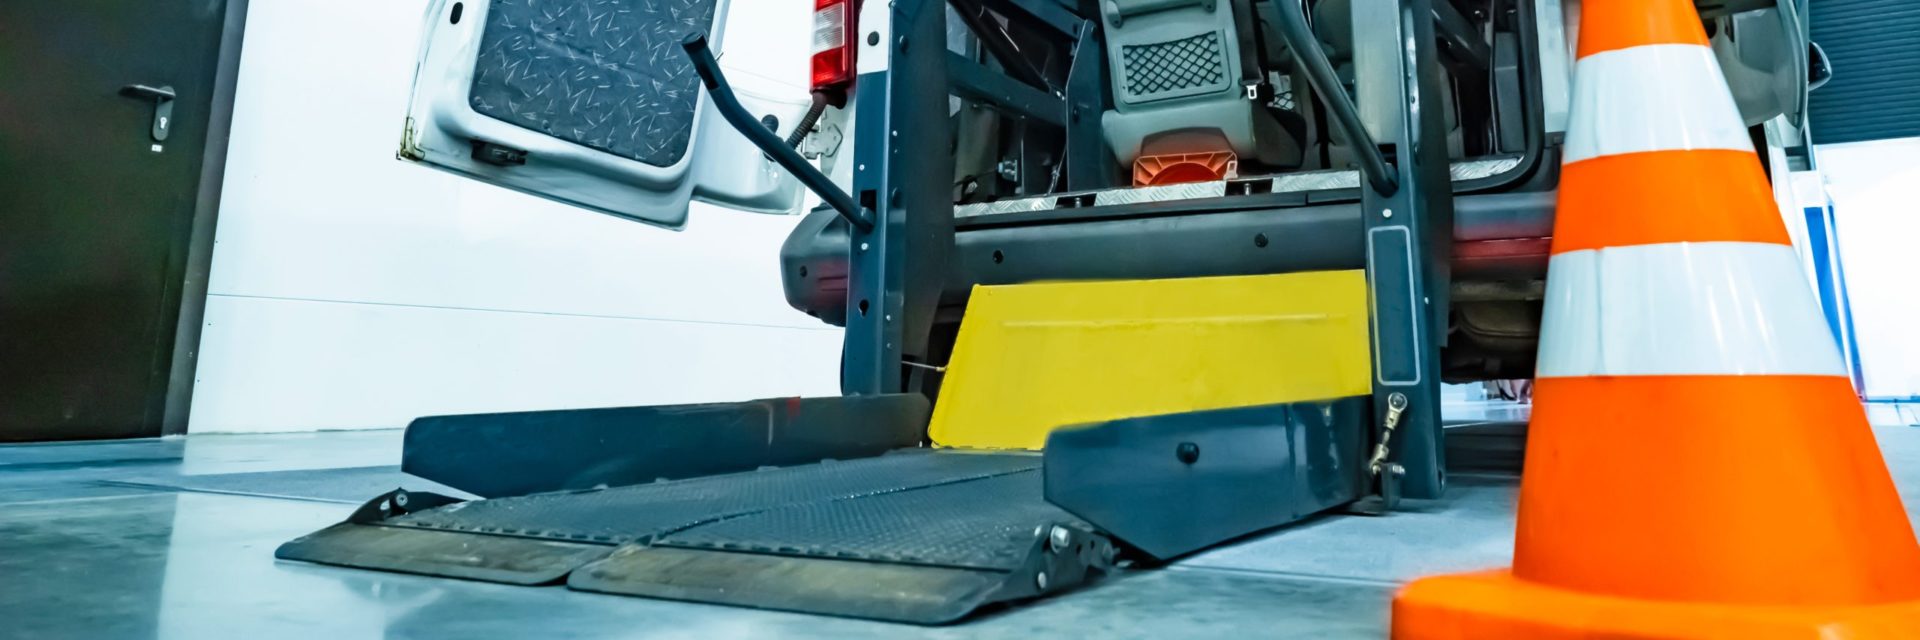 Disabled devices. Wheelchair lift mechanism. Machine equipped to transport a disabled person. Wheelchair lift into the bus.